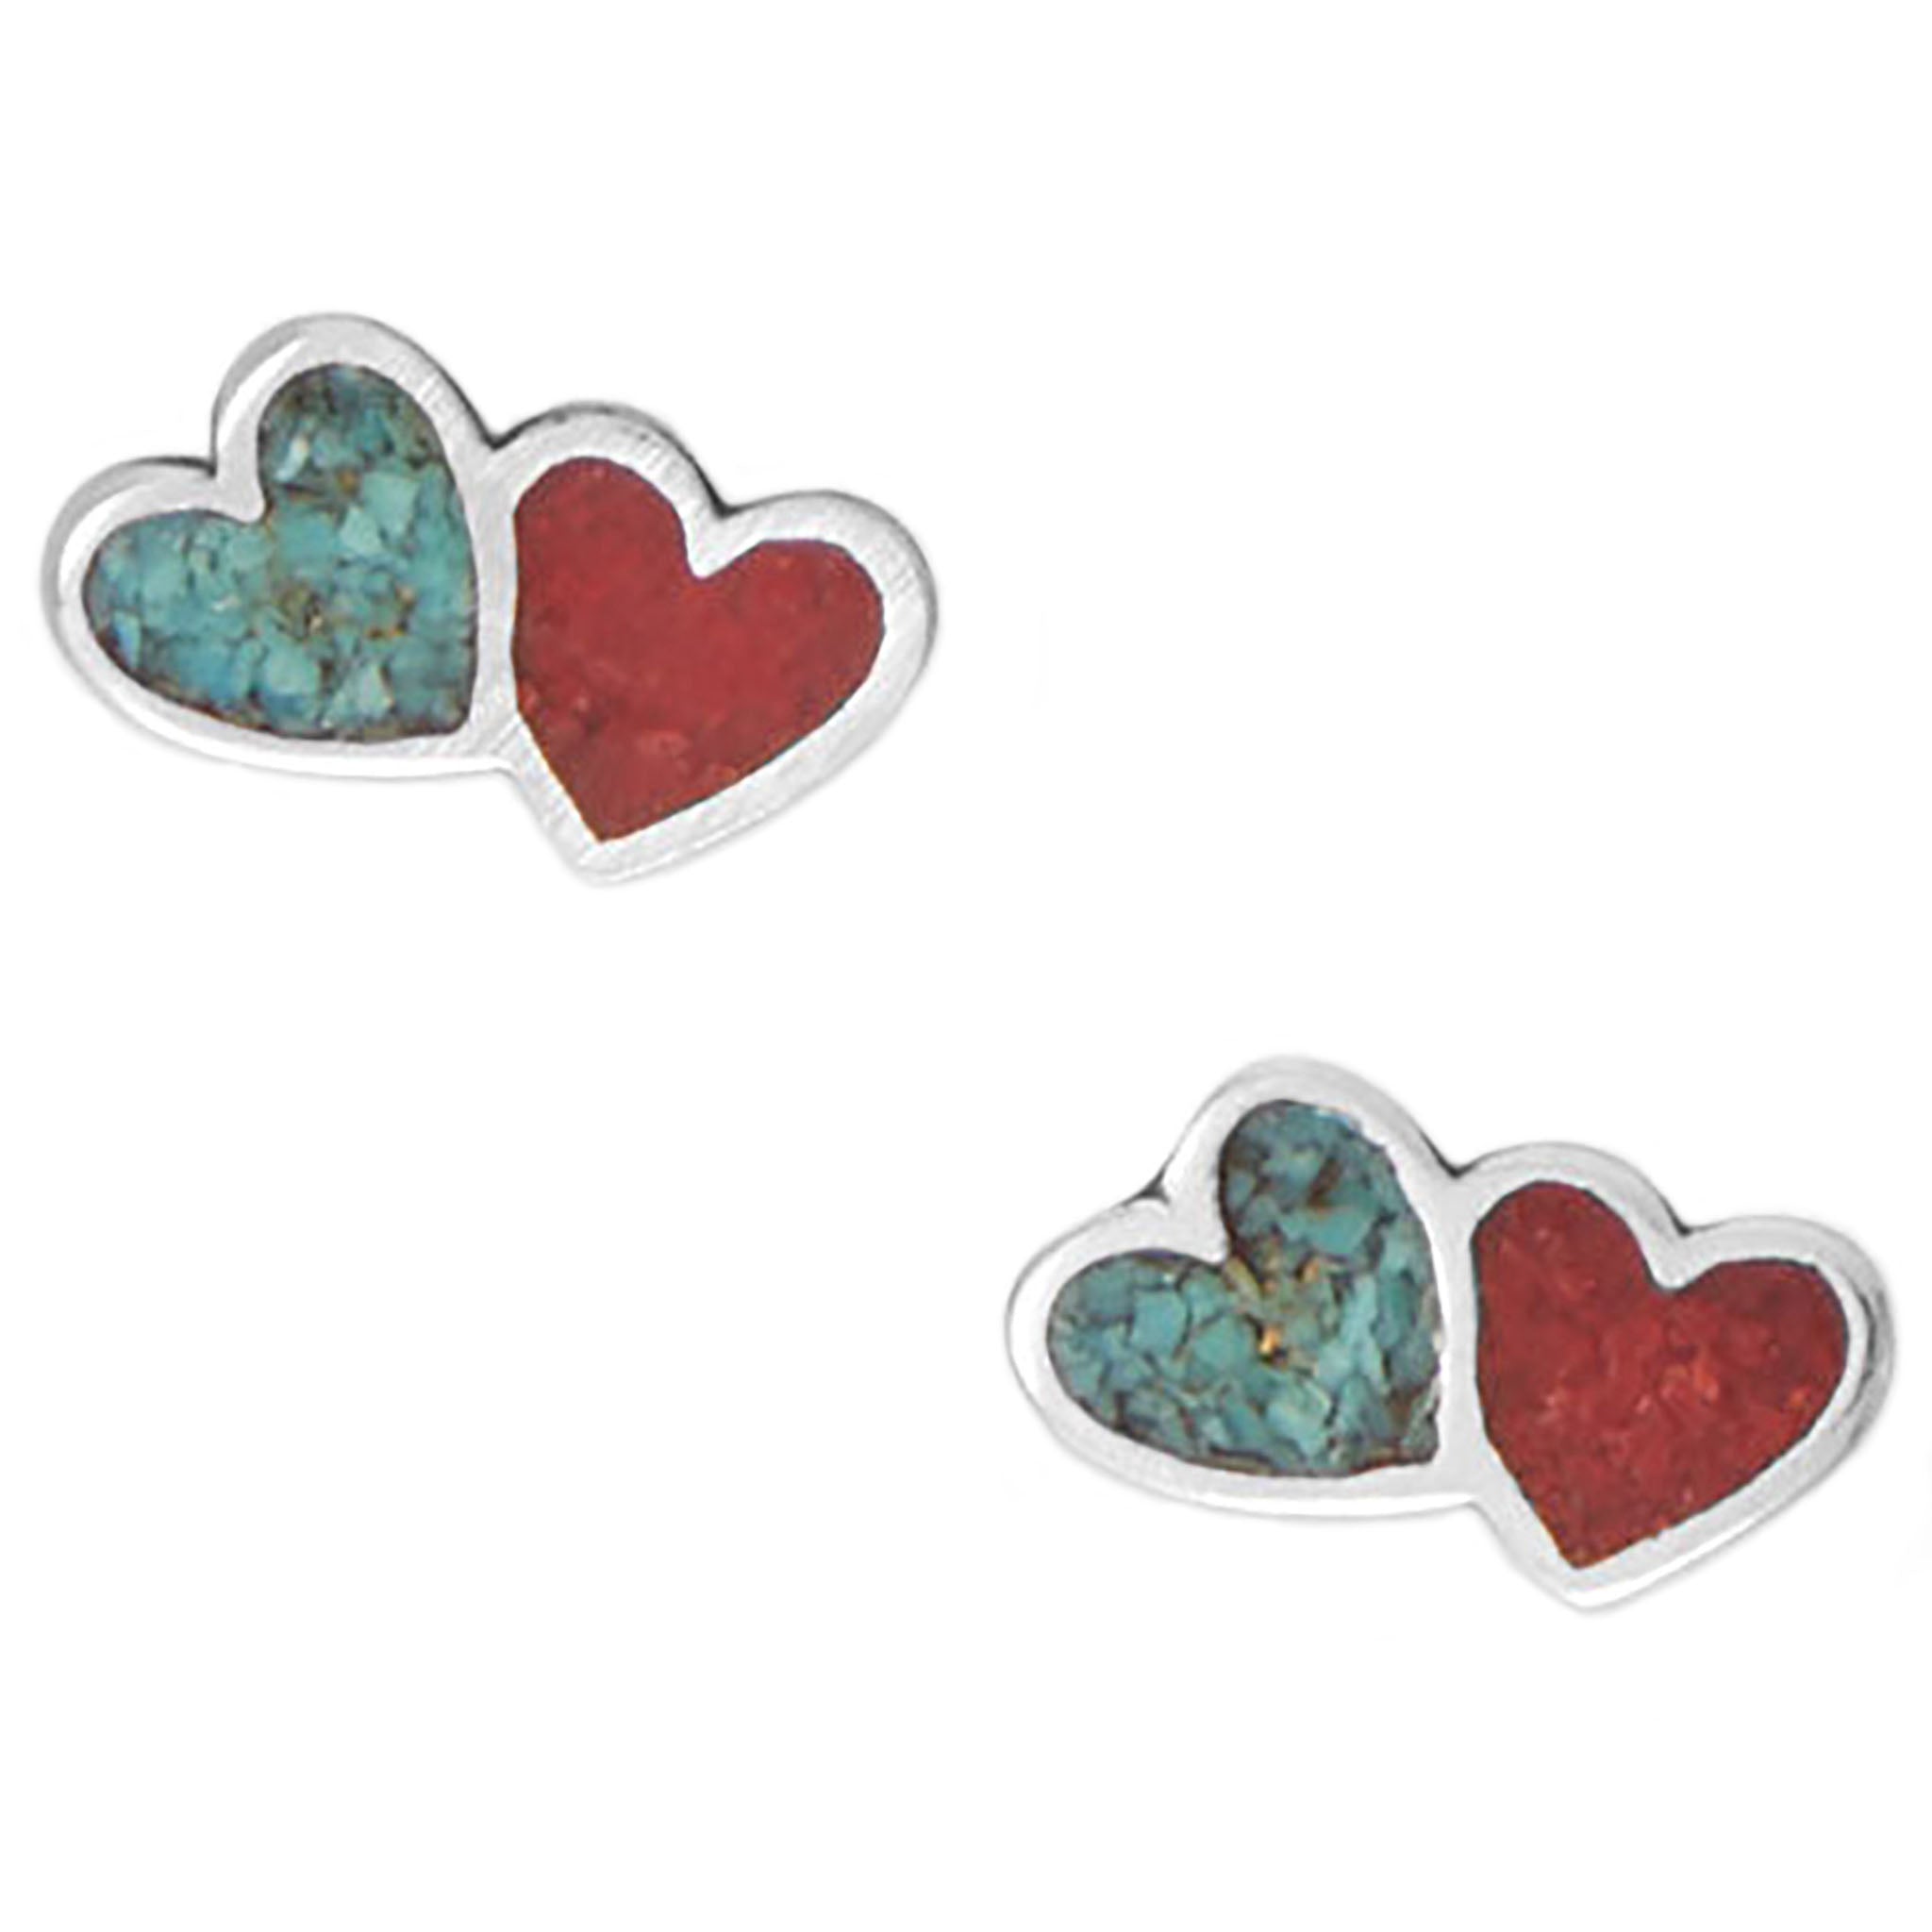 Turquoise and Coral Chip Double Heart Earrings